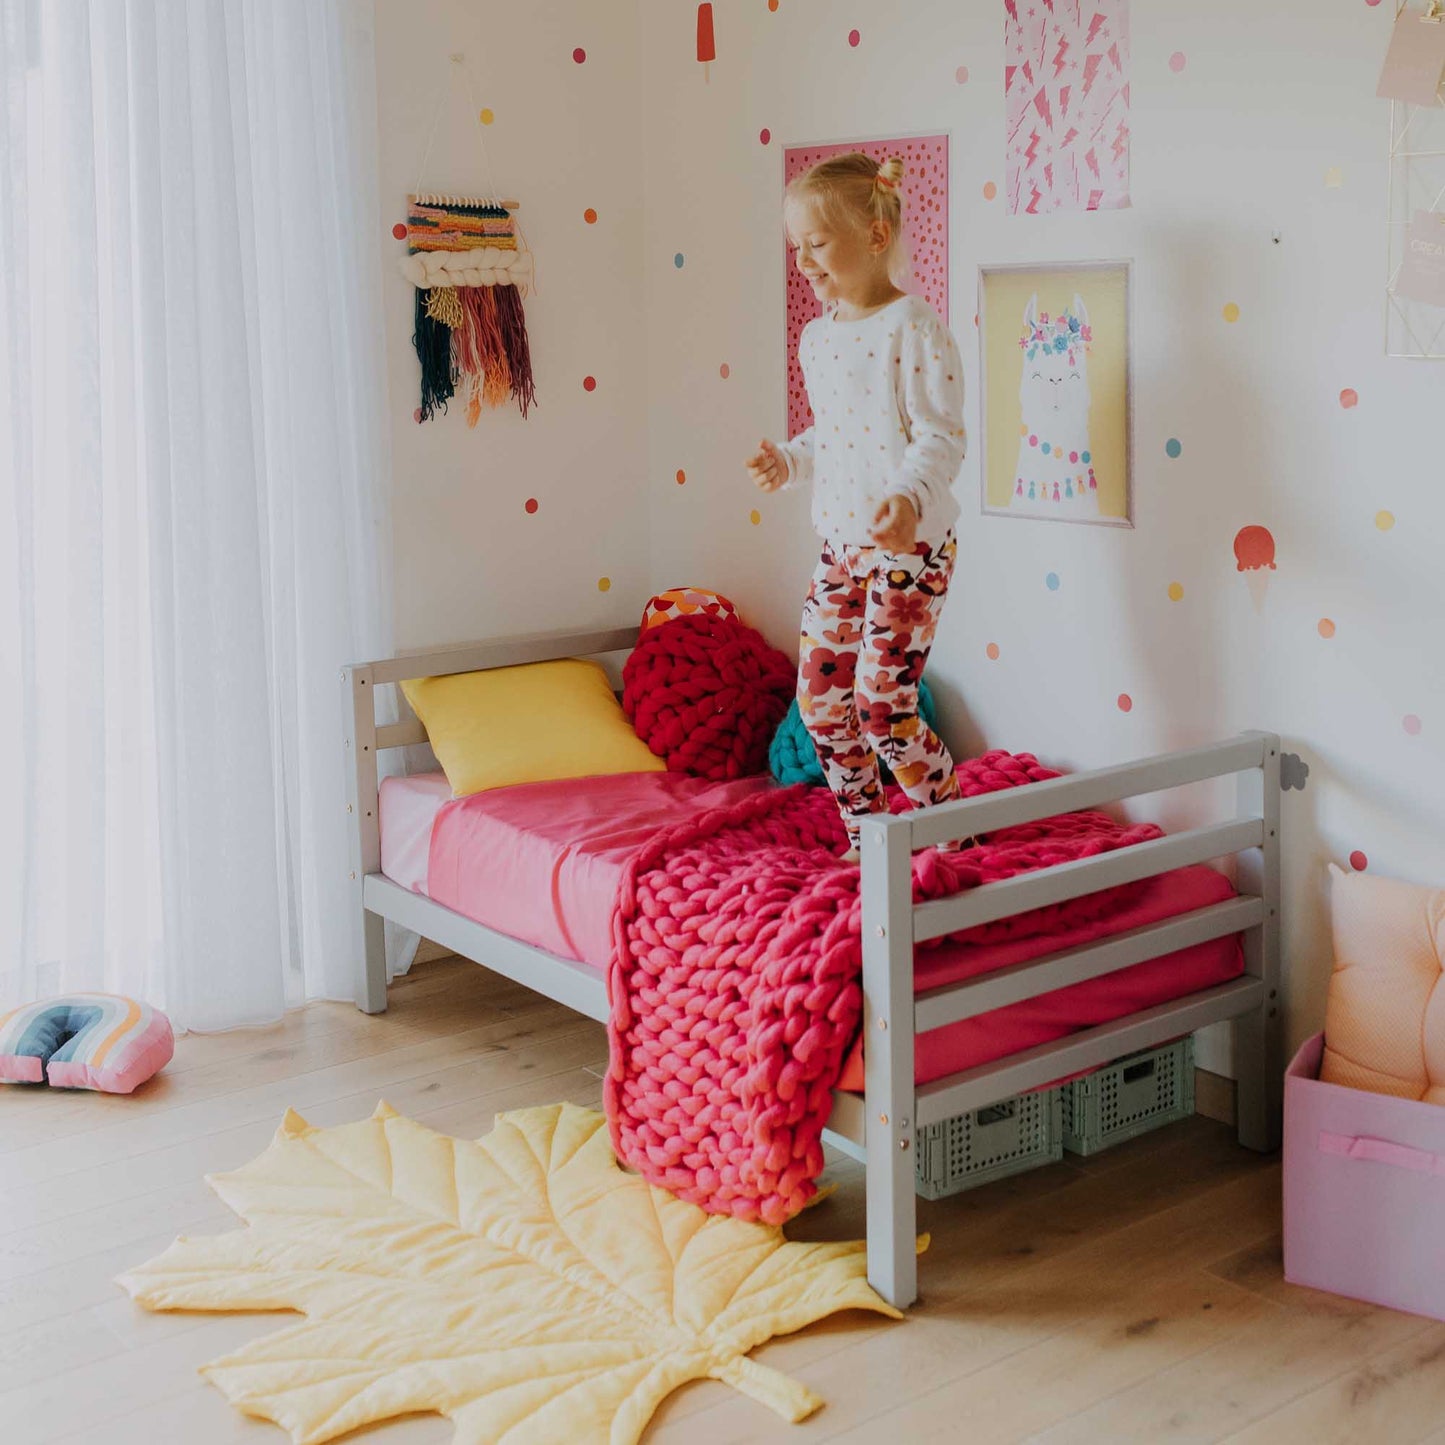 A long-lasting 2-in-1 kids' bed with a horizontal rail headboard and footboard in a girl's room, designed to grow with the child by Sweet Home From Wood.